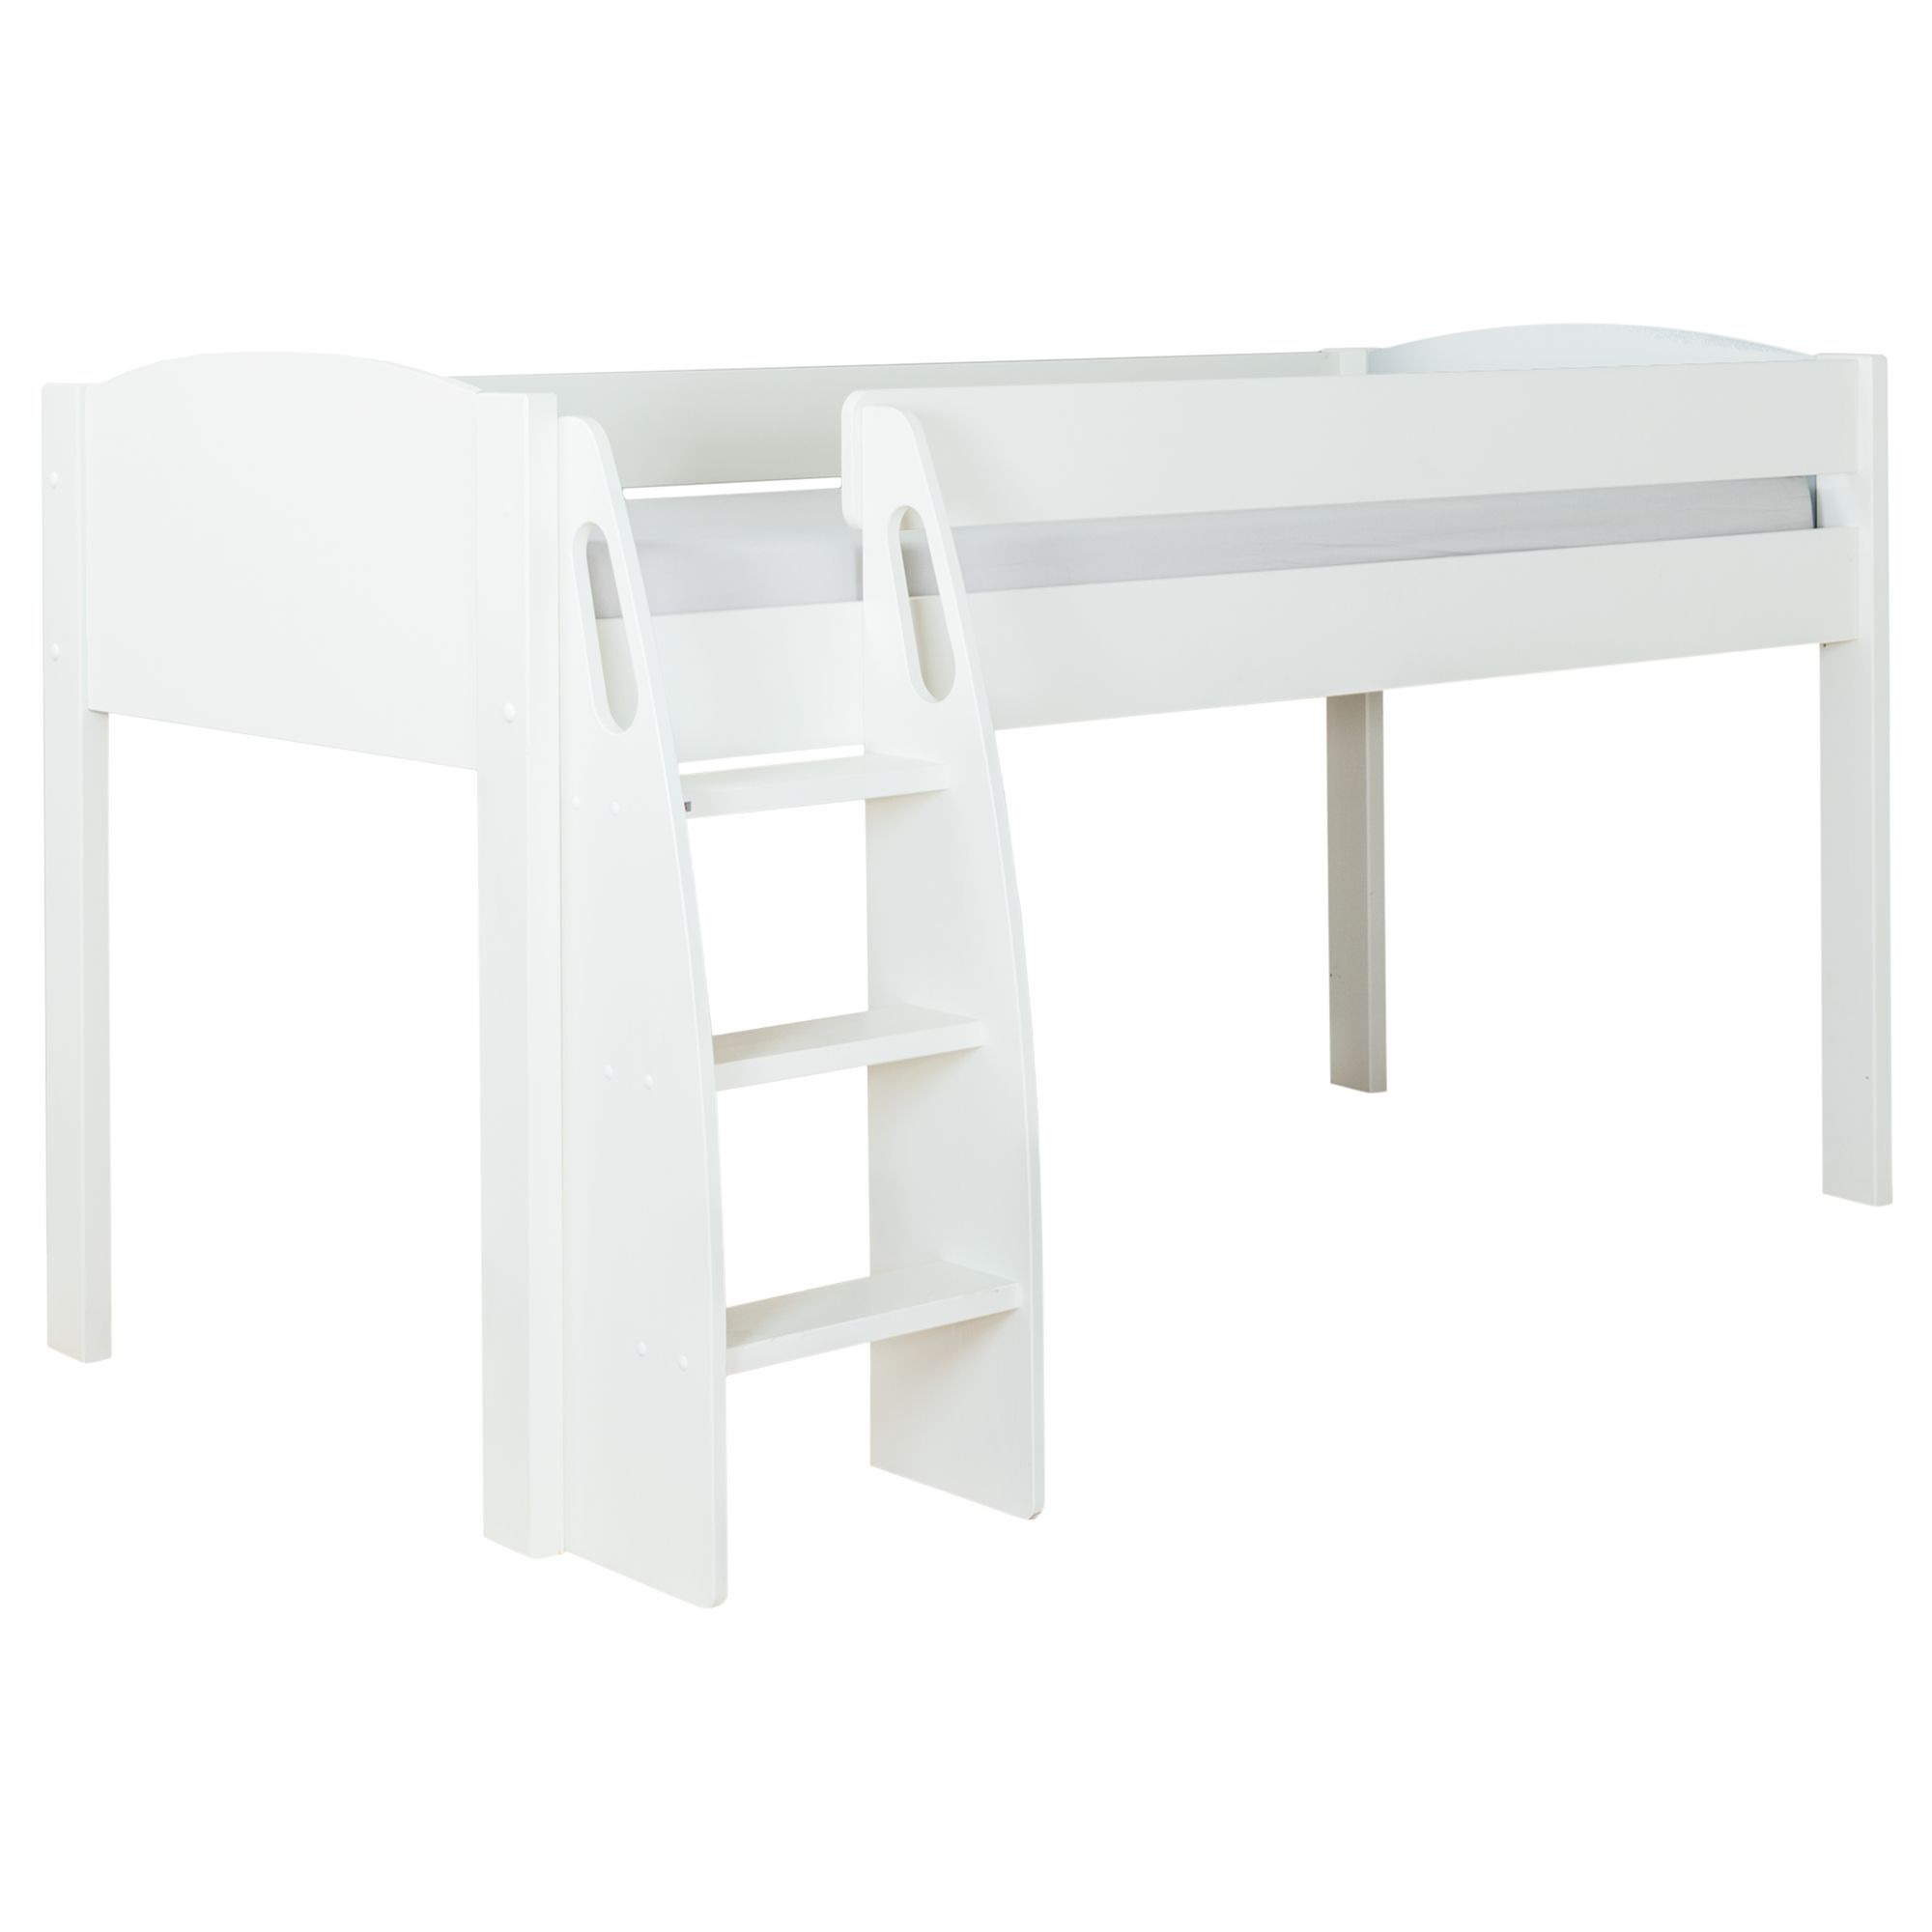 Stompa Uno S Plus Mid-sleeper Bed Frame - image 1